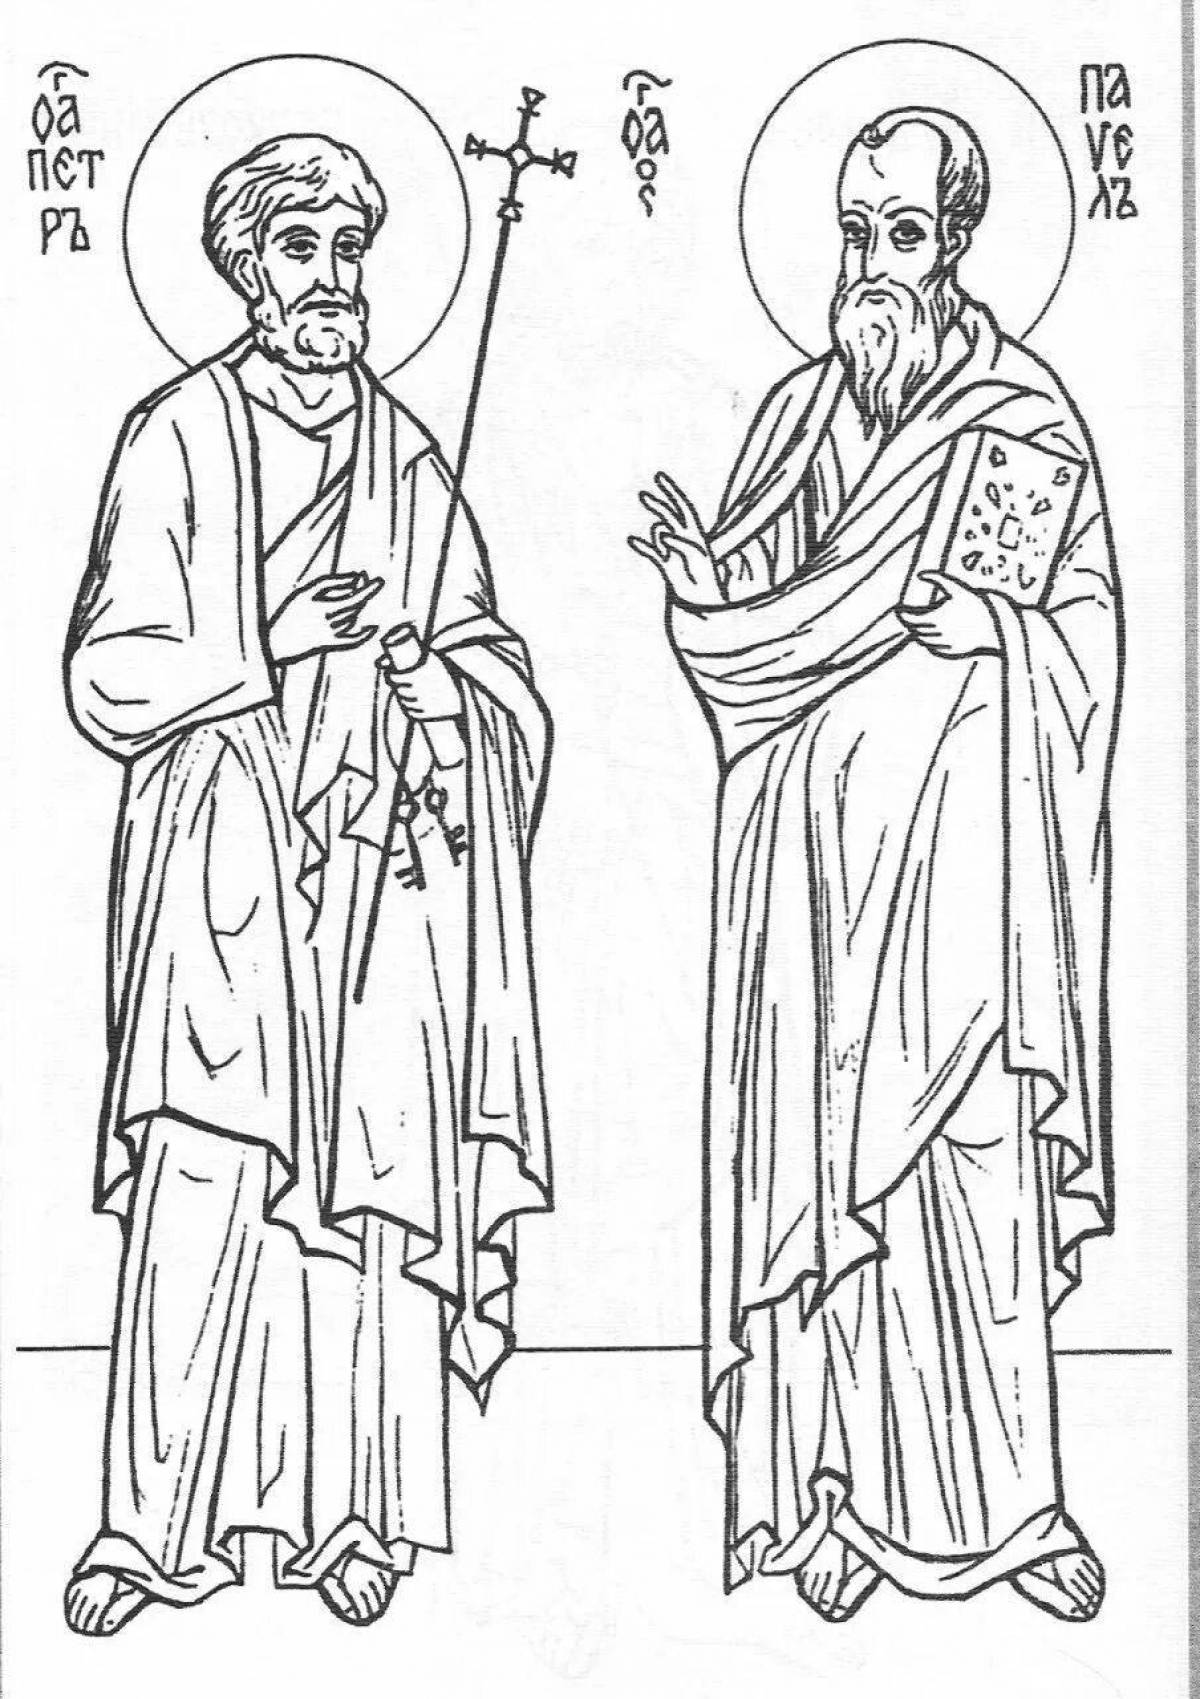 Delightful cyril and methodius coloring book